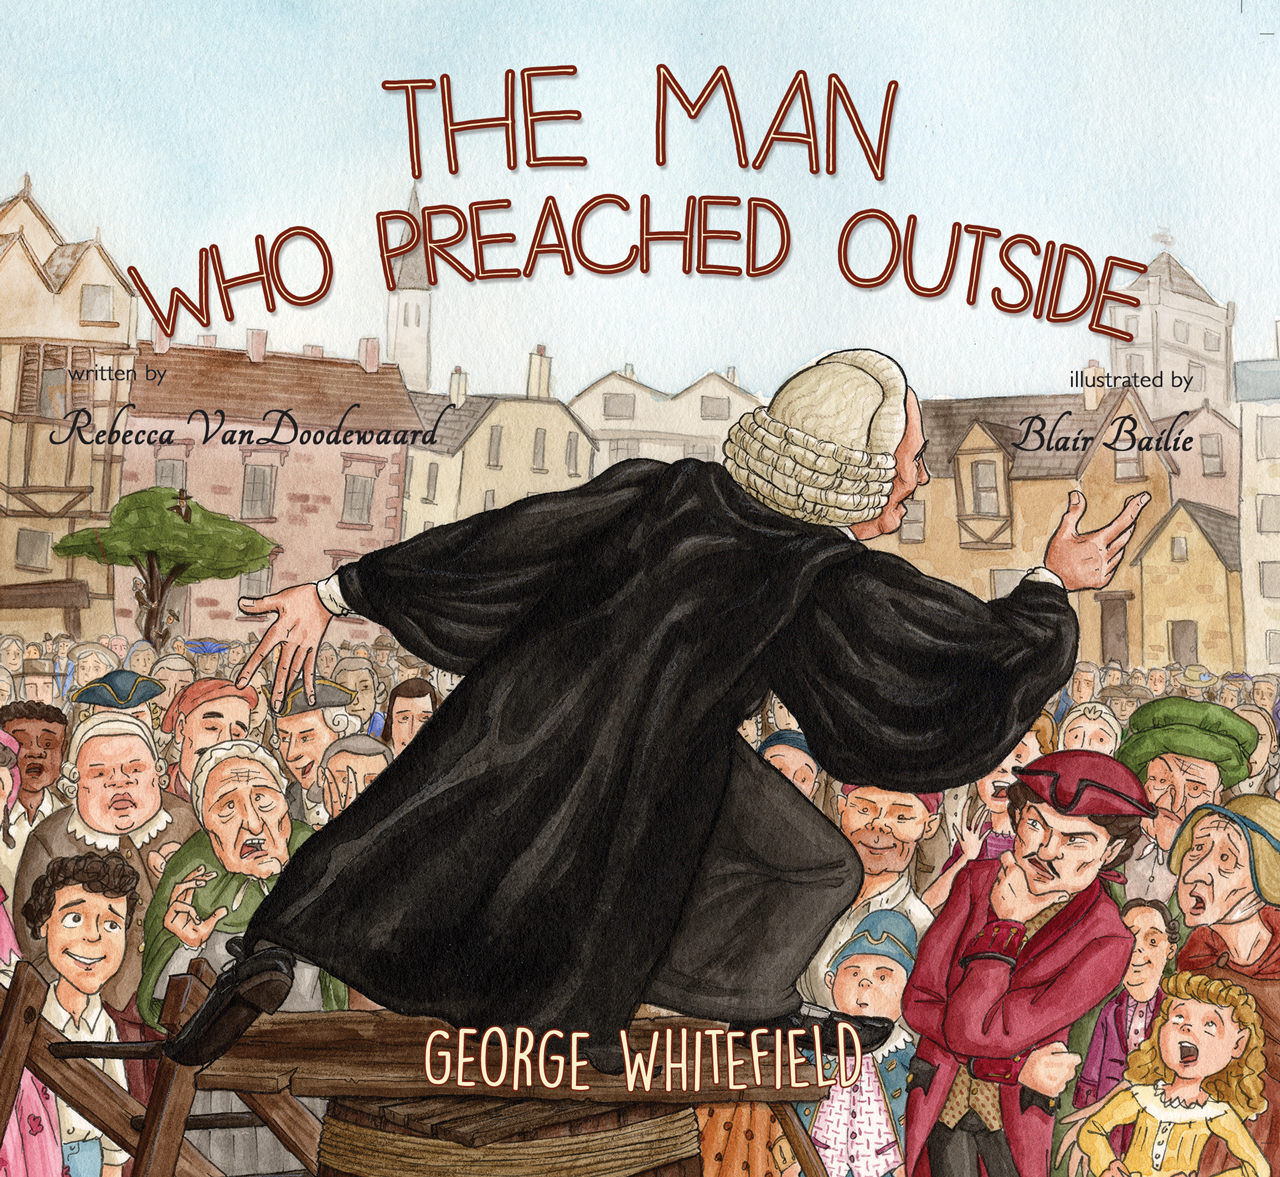 GEORGE WHITEFIELD THE MAN WHO PREACHED OUTSIDE